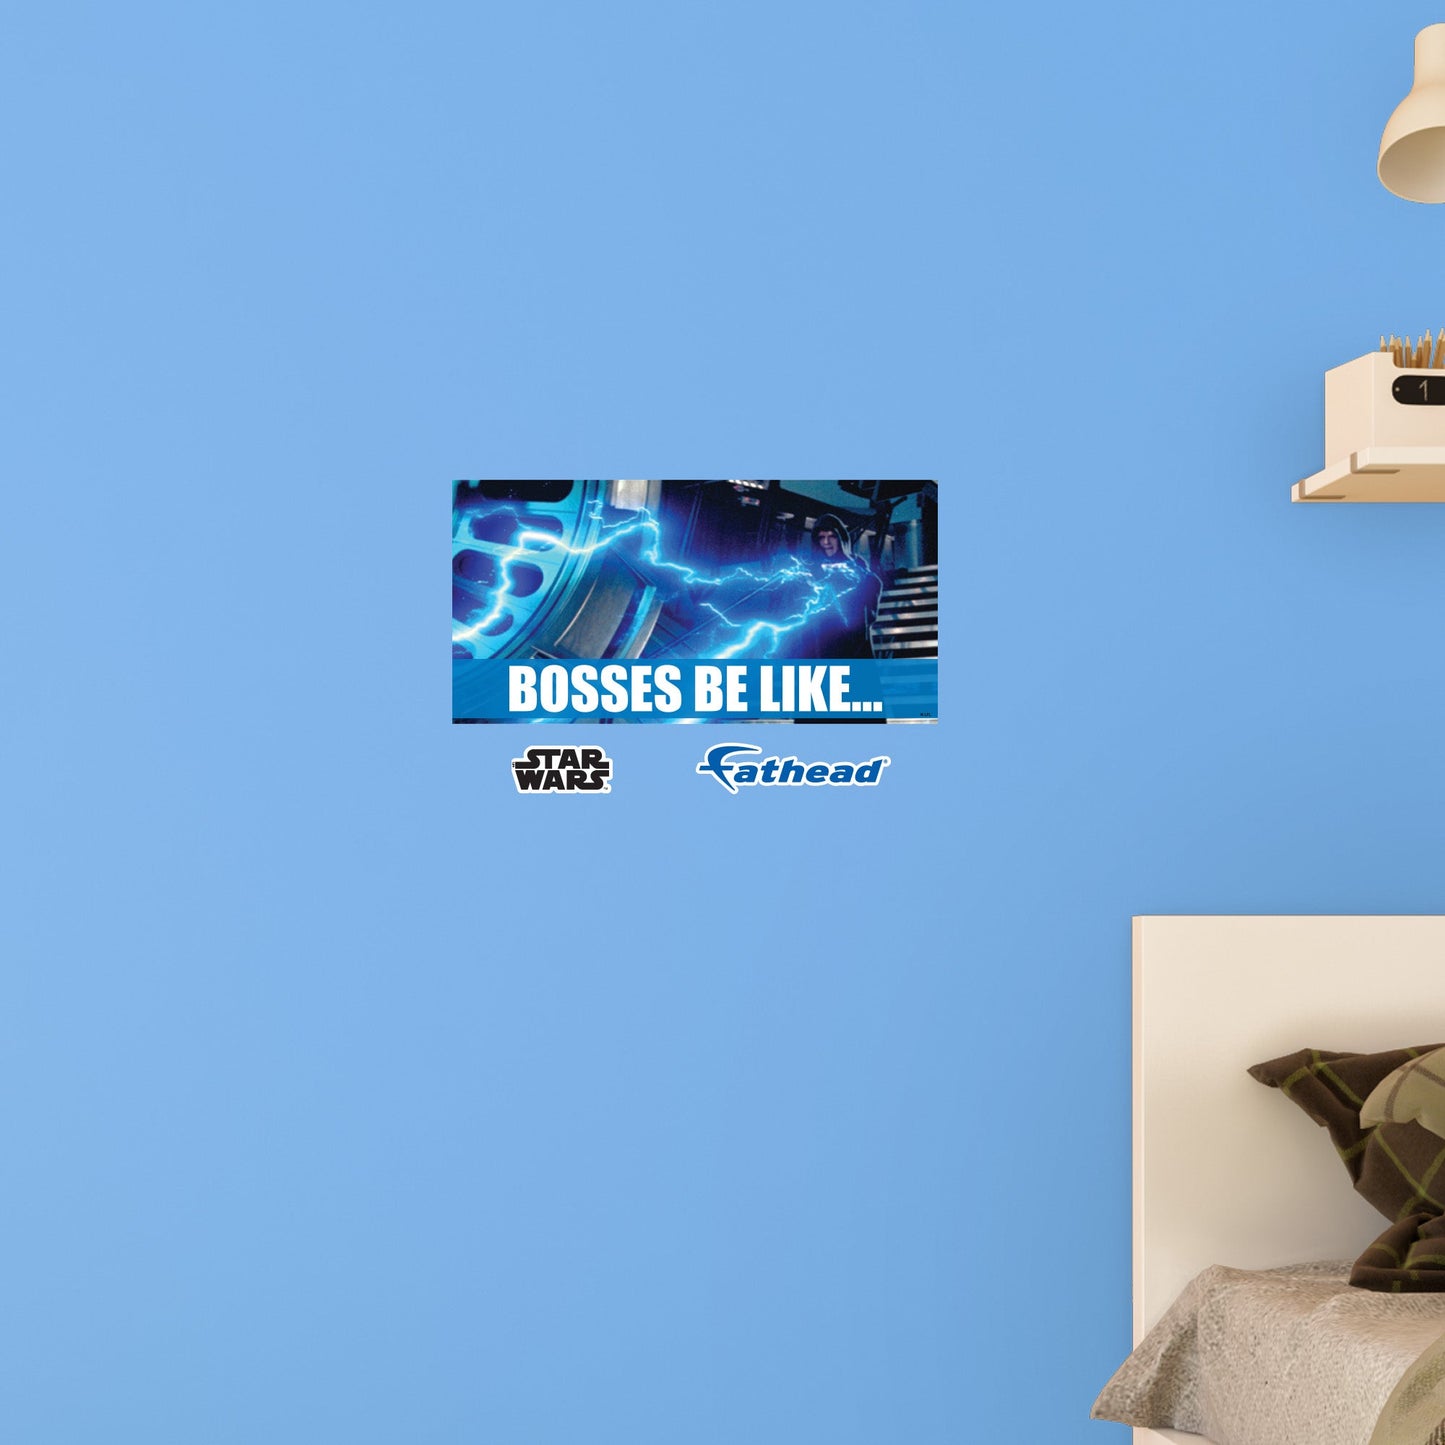 Bosses Be Like meme Poster        - Officially Licensed Star Wars Removable     Adhesive Decal